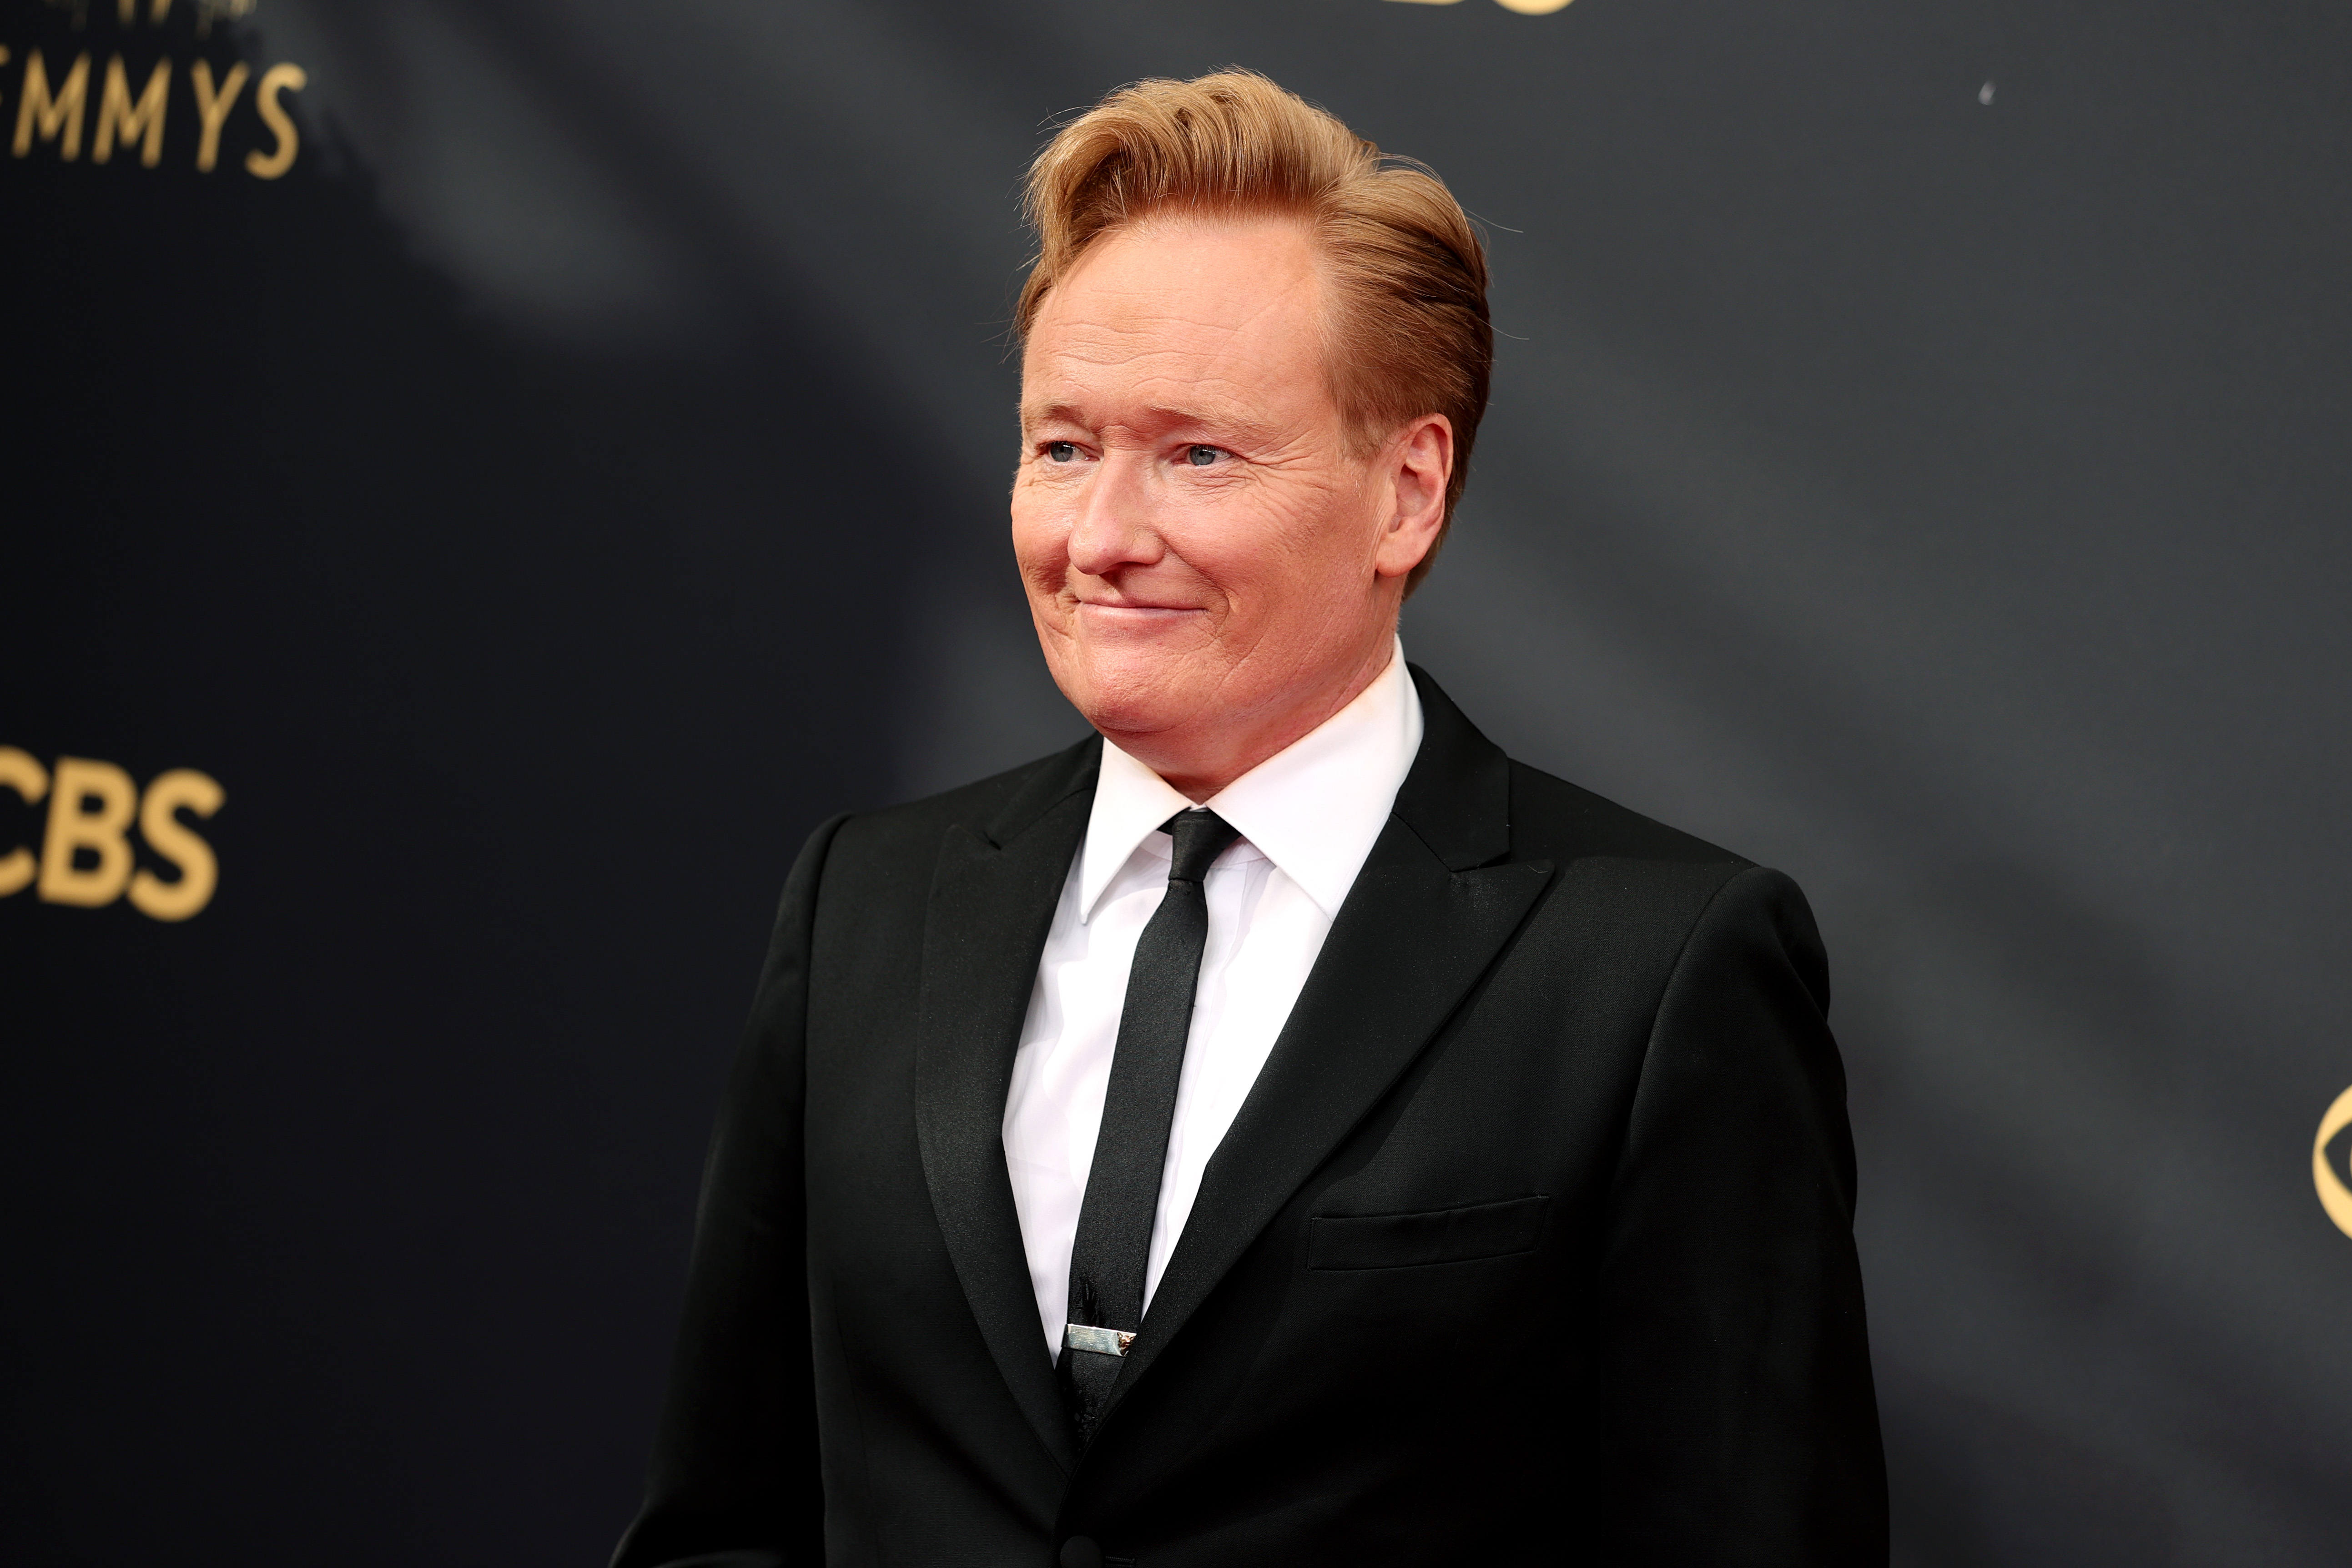 Conan O'Brien attends the 2021 Emmy Awards  in a black suit.